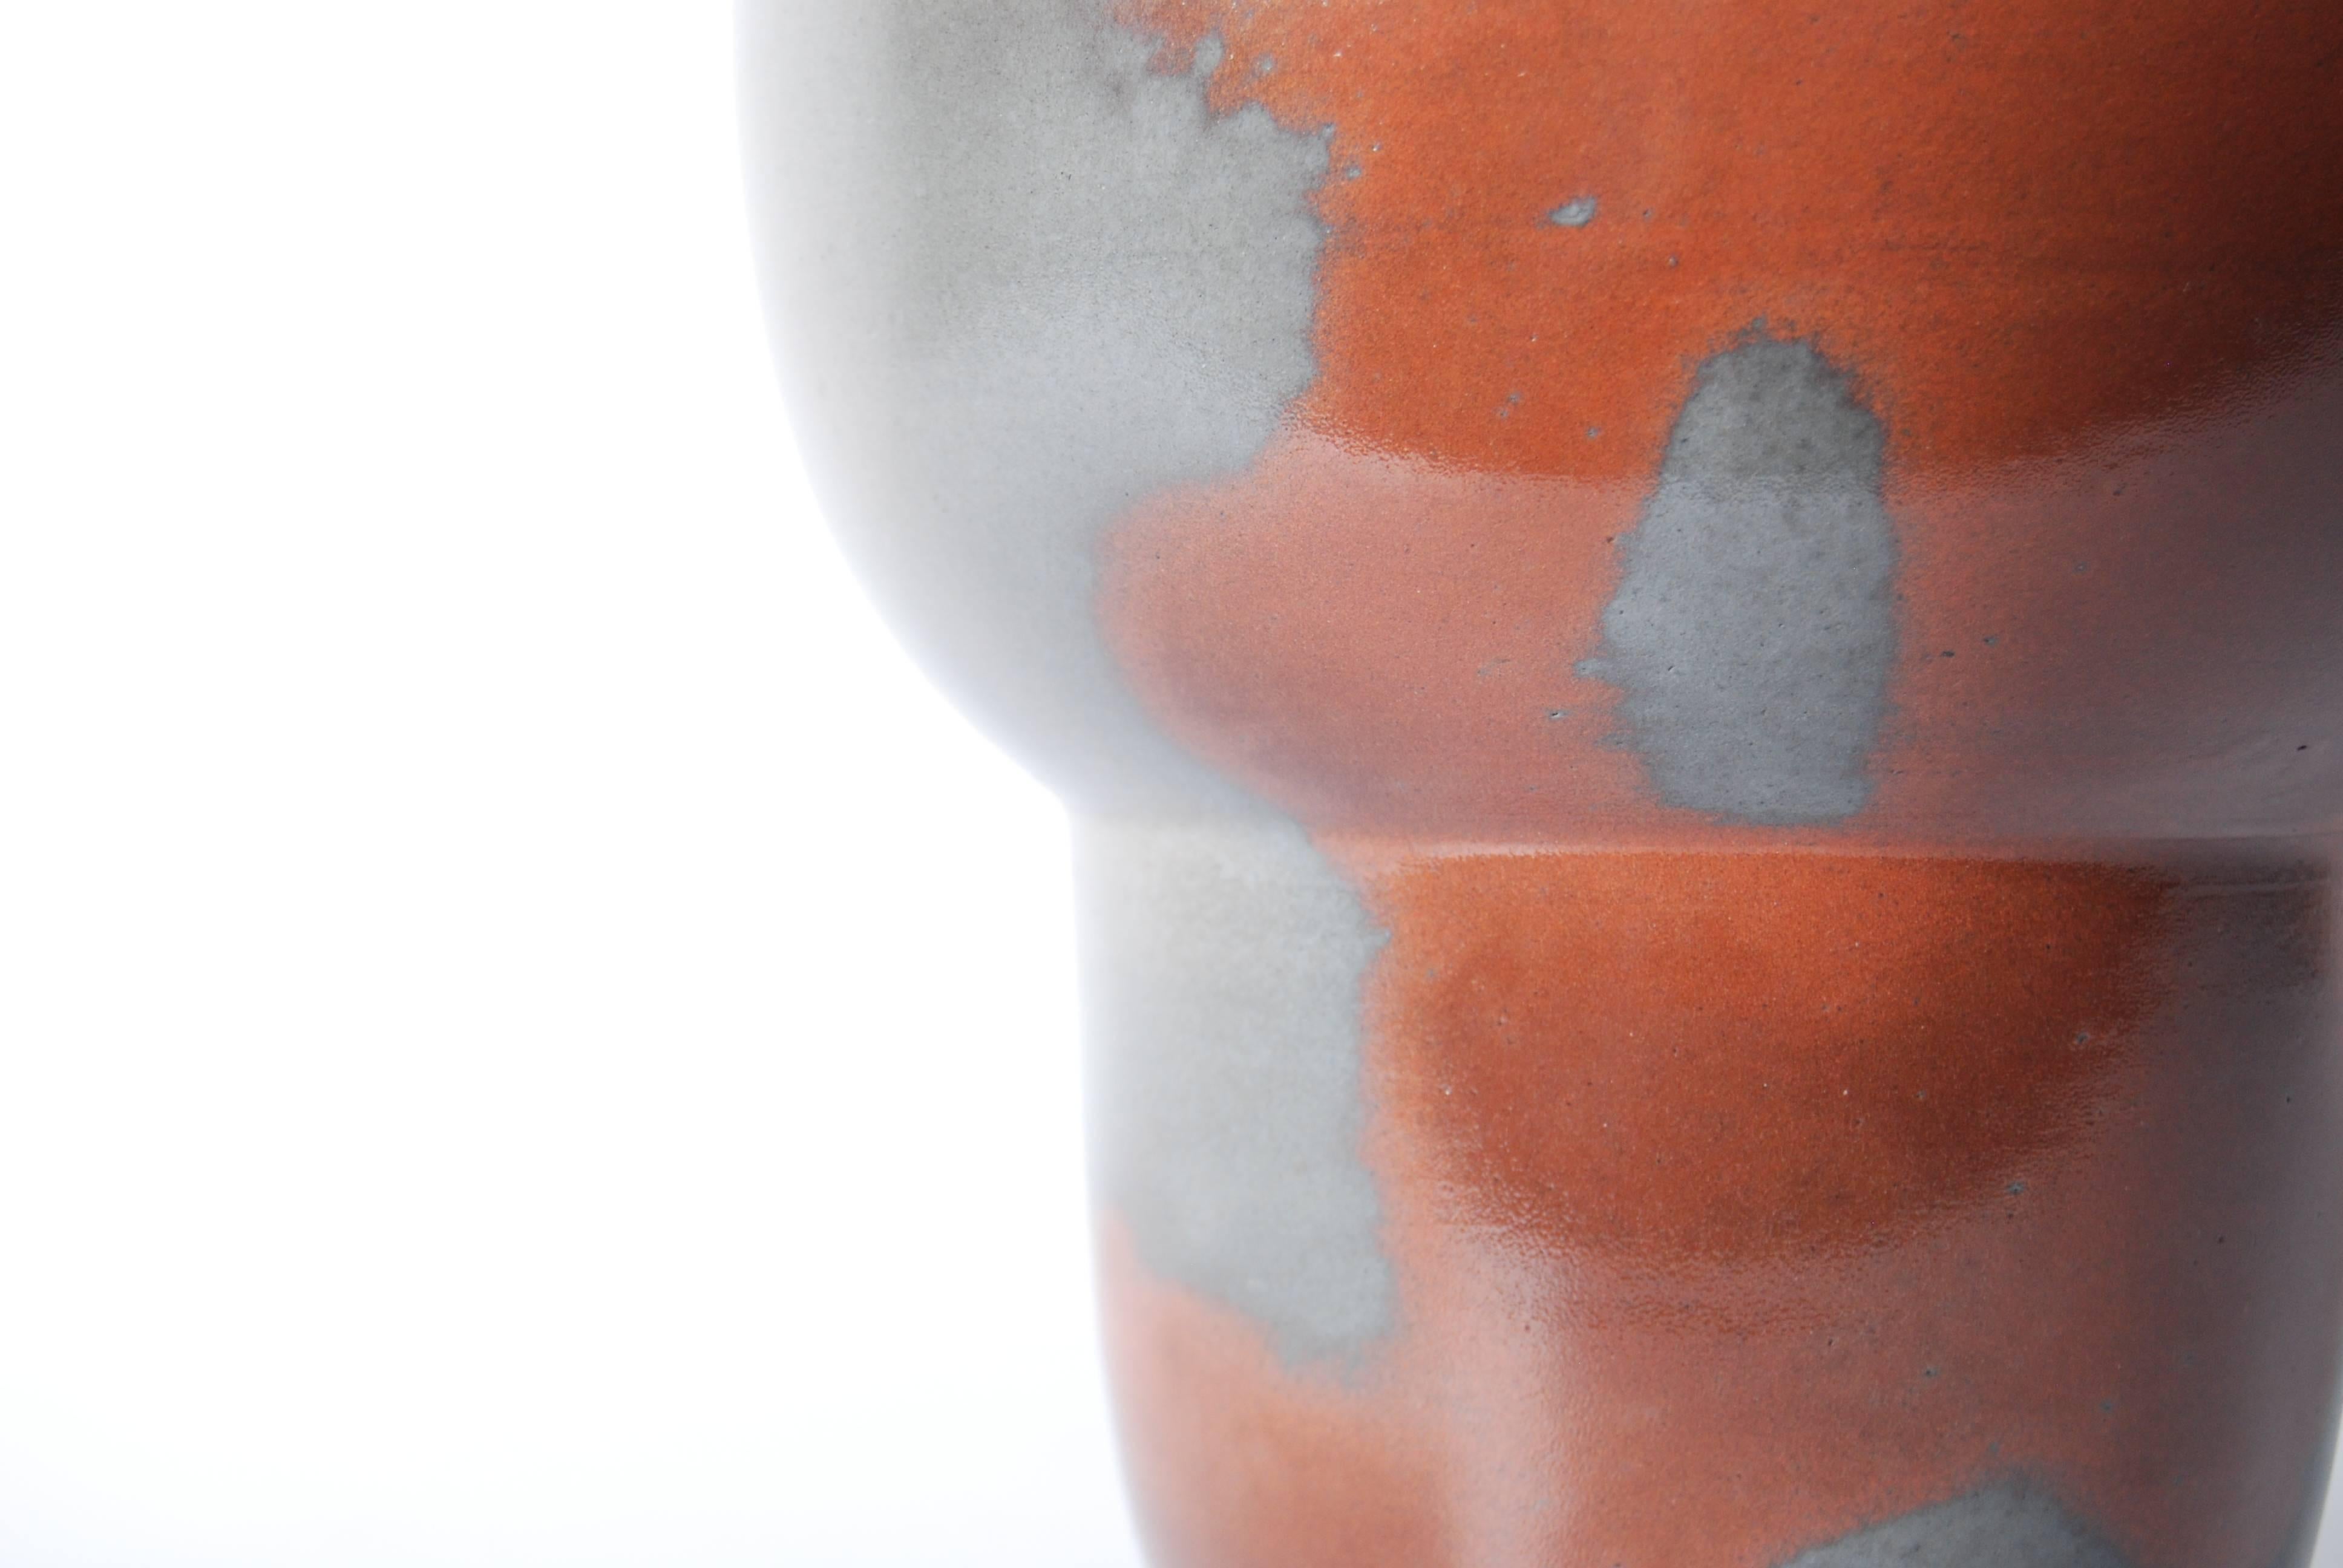 This elegant water jar for tea ceremony (Mizusashi), from the Okayama prefecture of Japan features striking mottled tones of grey and rust which are the result of charcoal ash staining the pottery during the 8-day wood-kiln firing process. 

As one